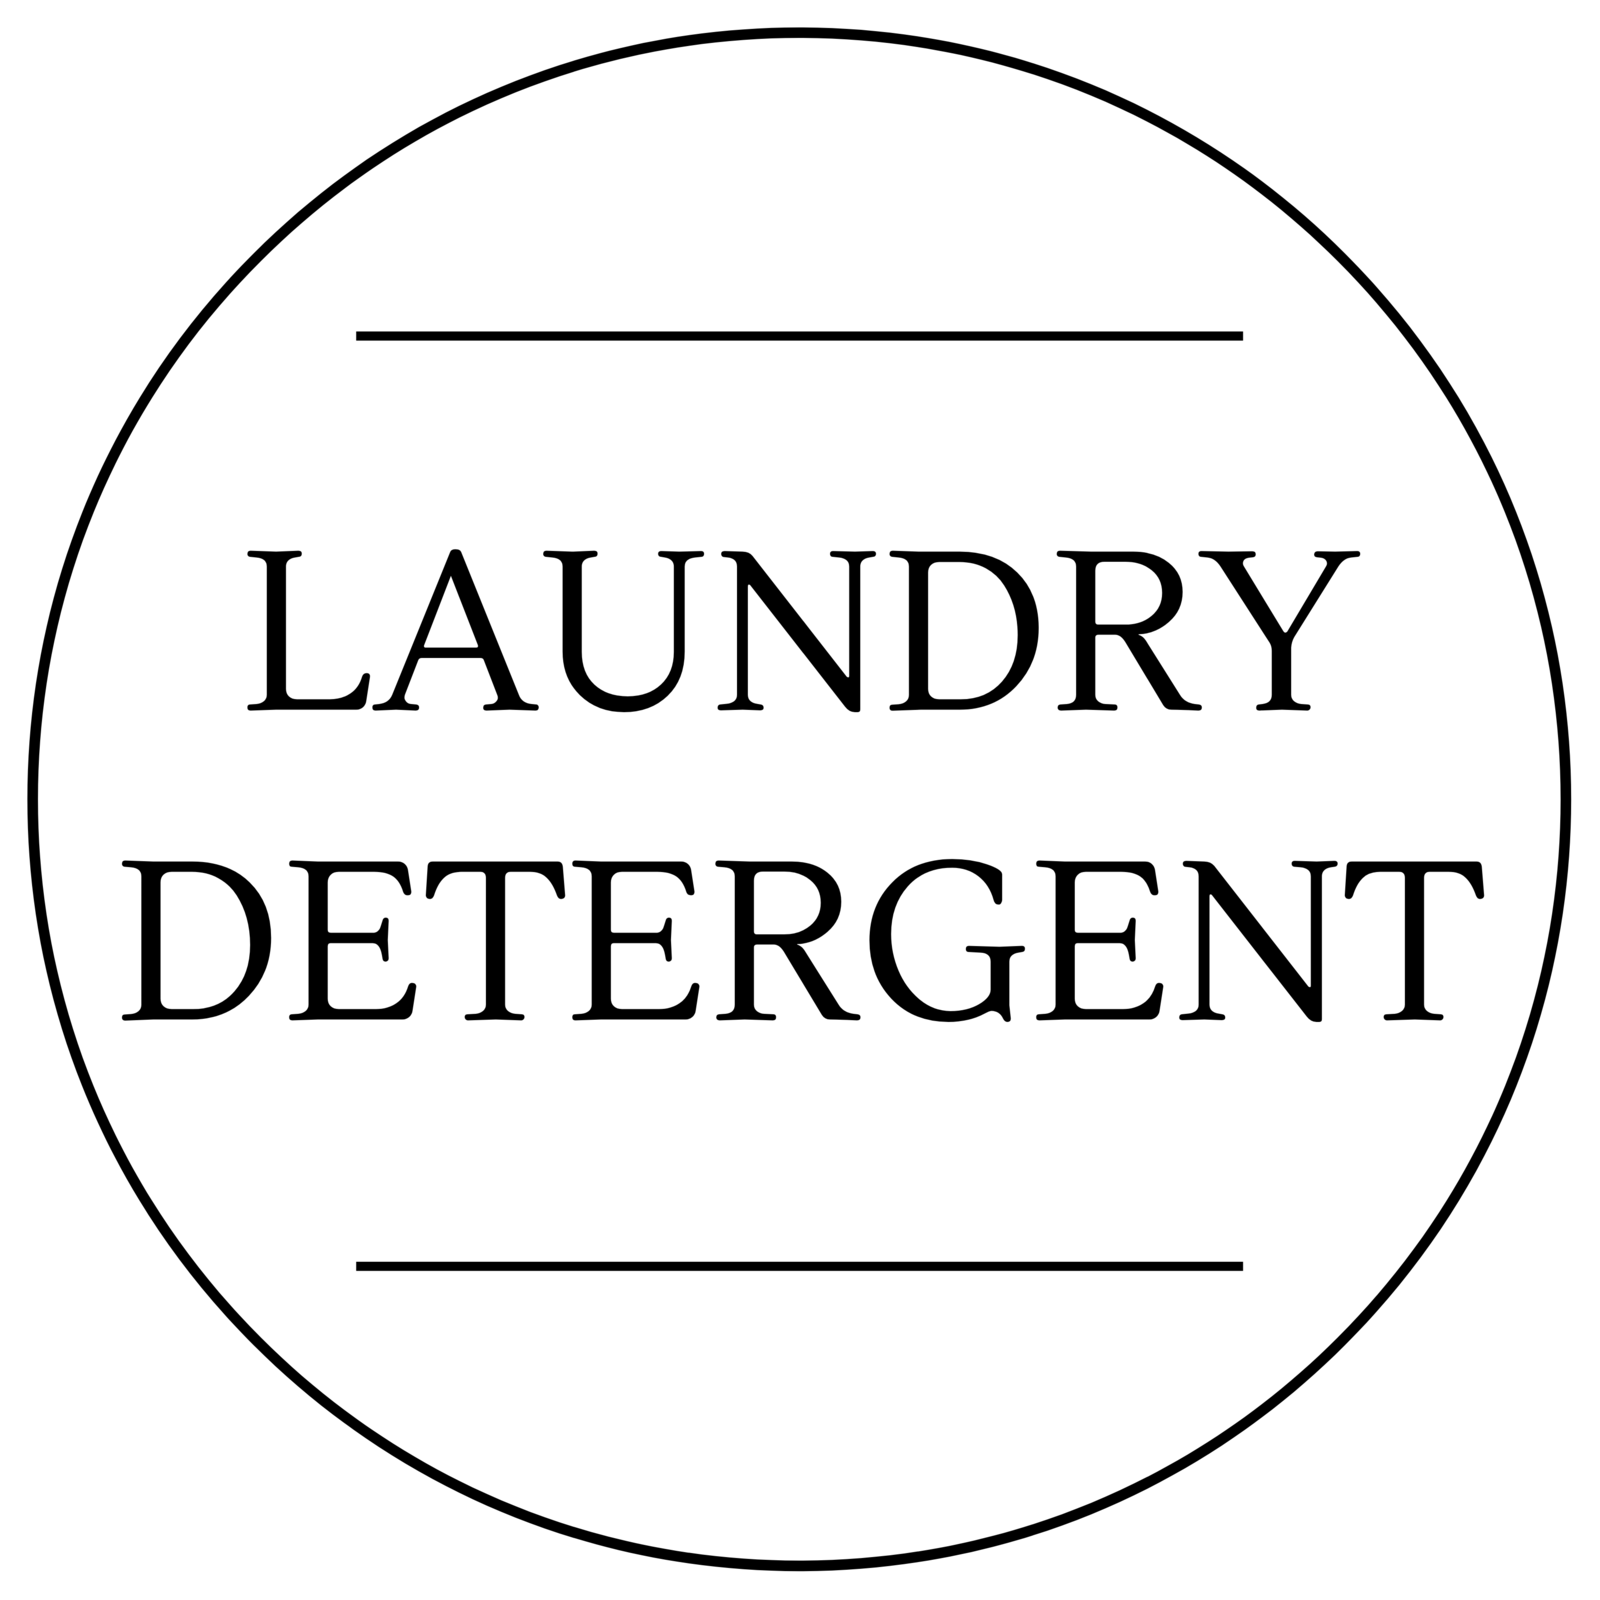 printable-laundry-detergent-label-template-printable-templates